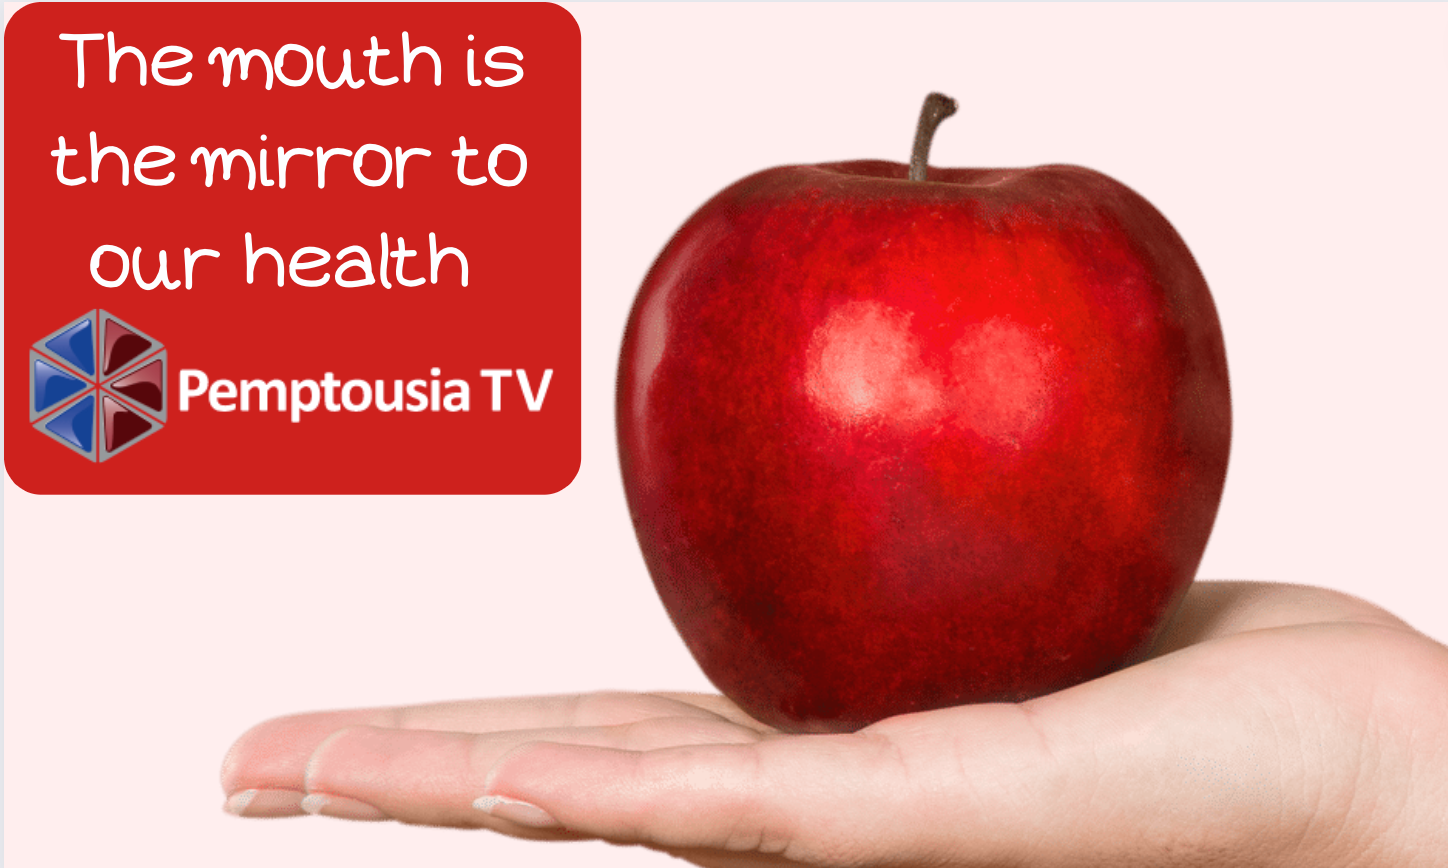 The mouth is the mirror of our health!